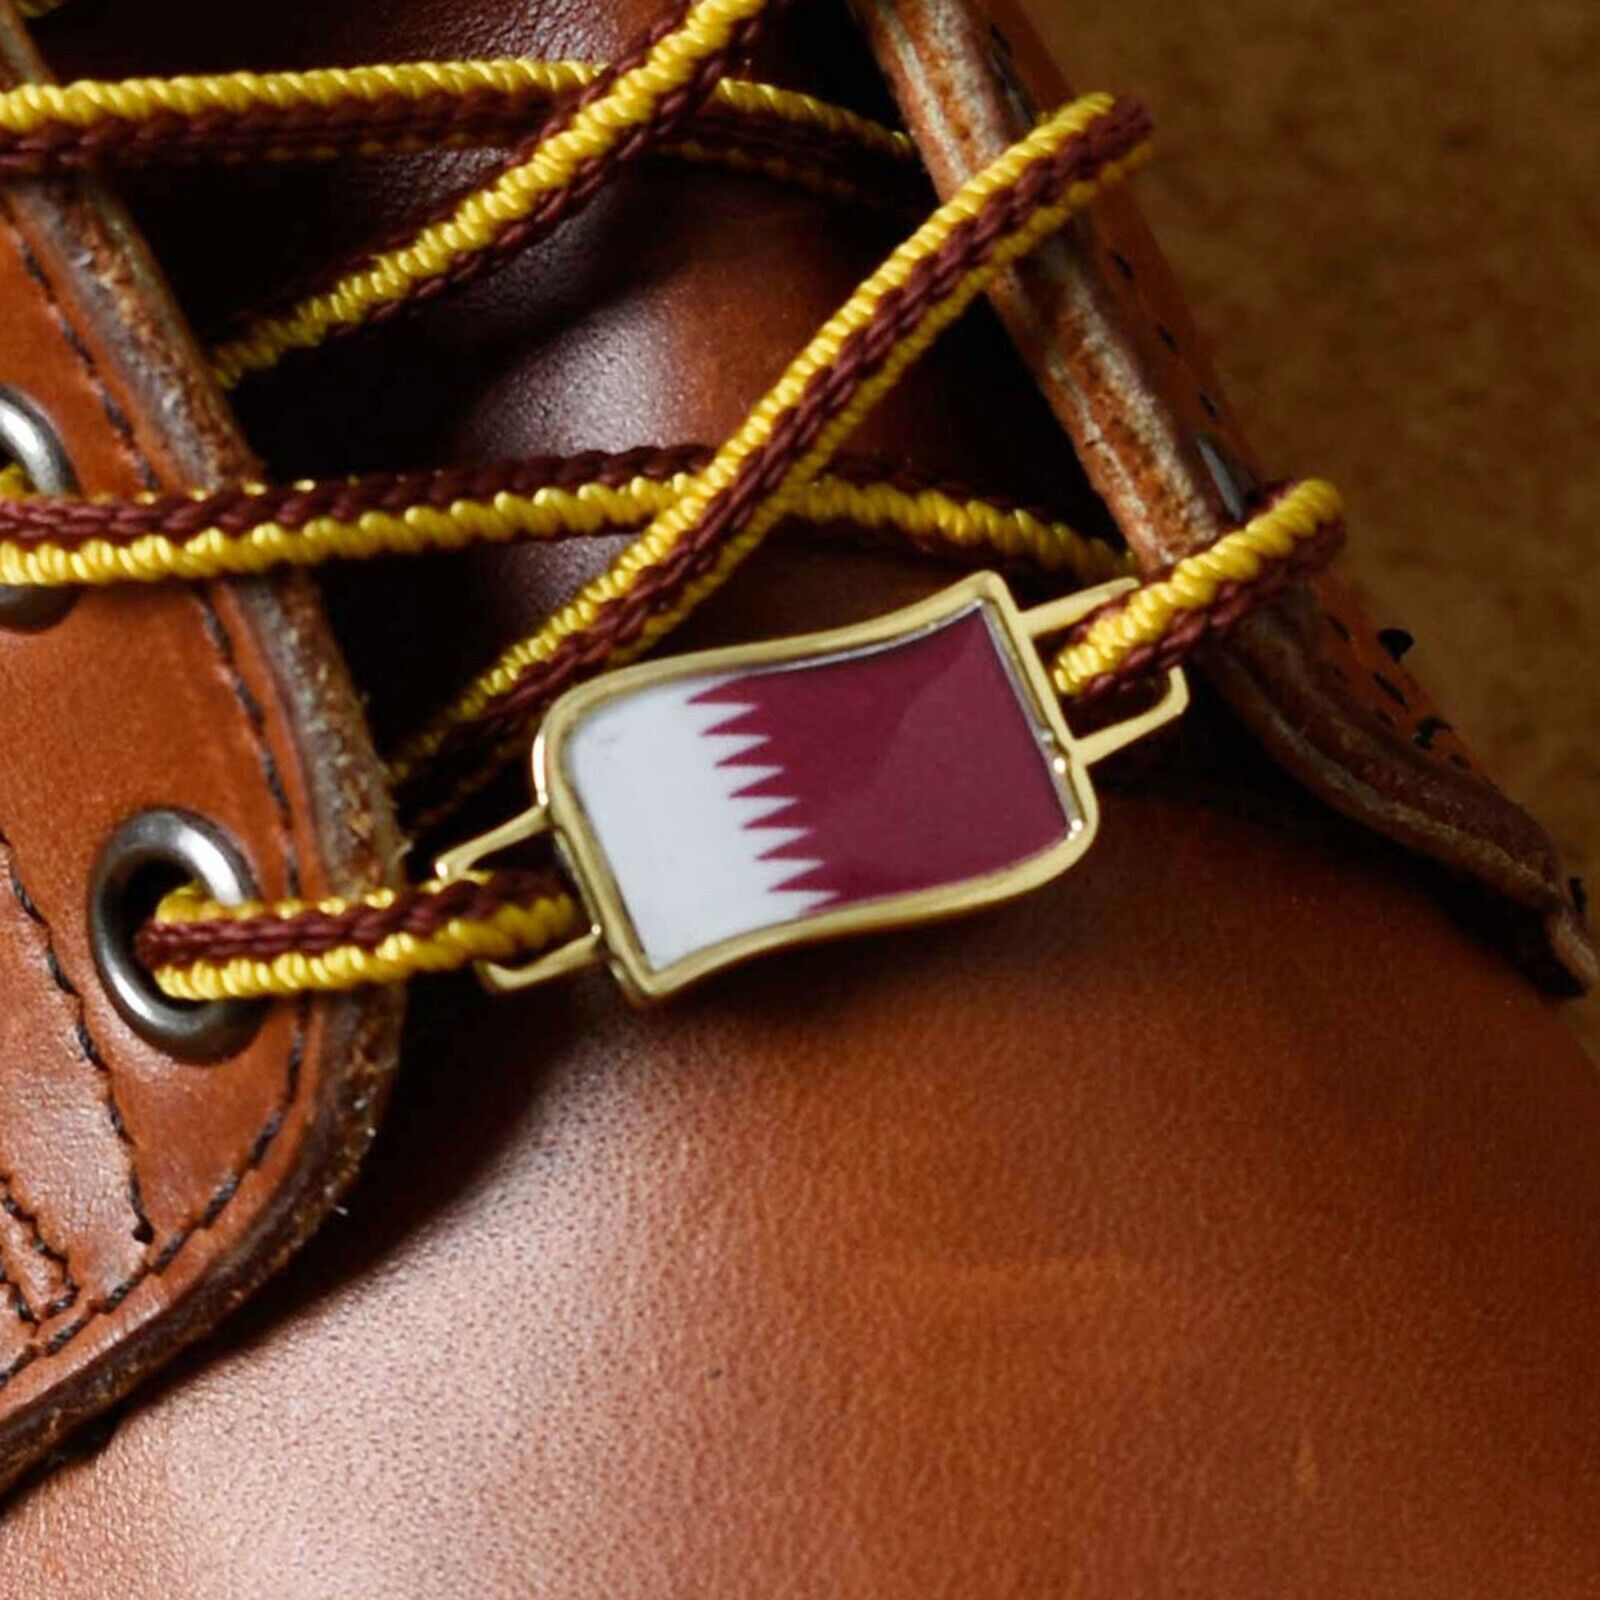 Qatar Flags Shoes Boot Shoelace Keeper Holder Charm BrooklynMaker